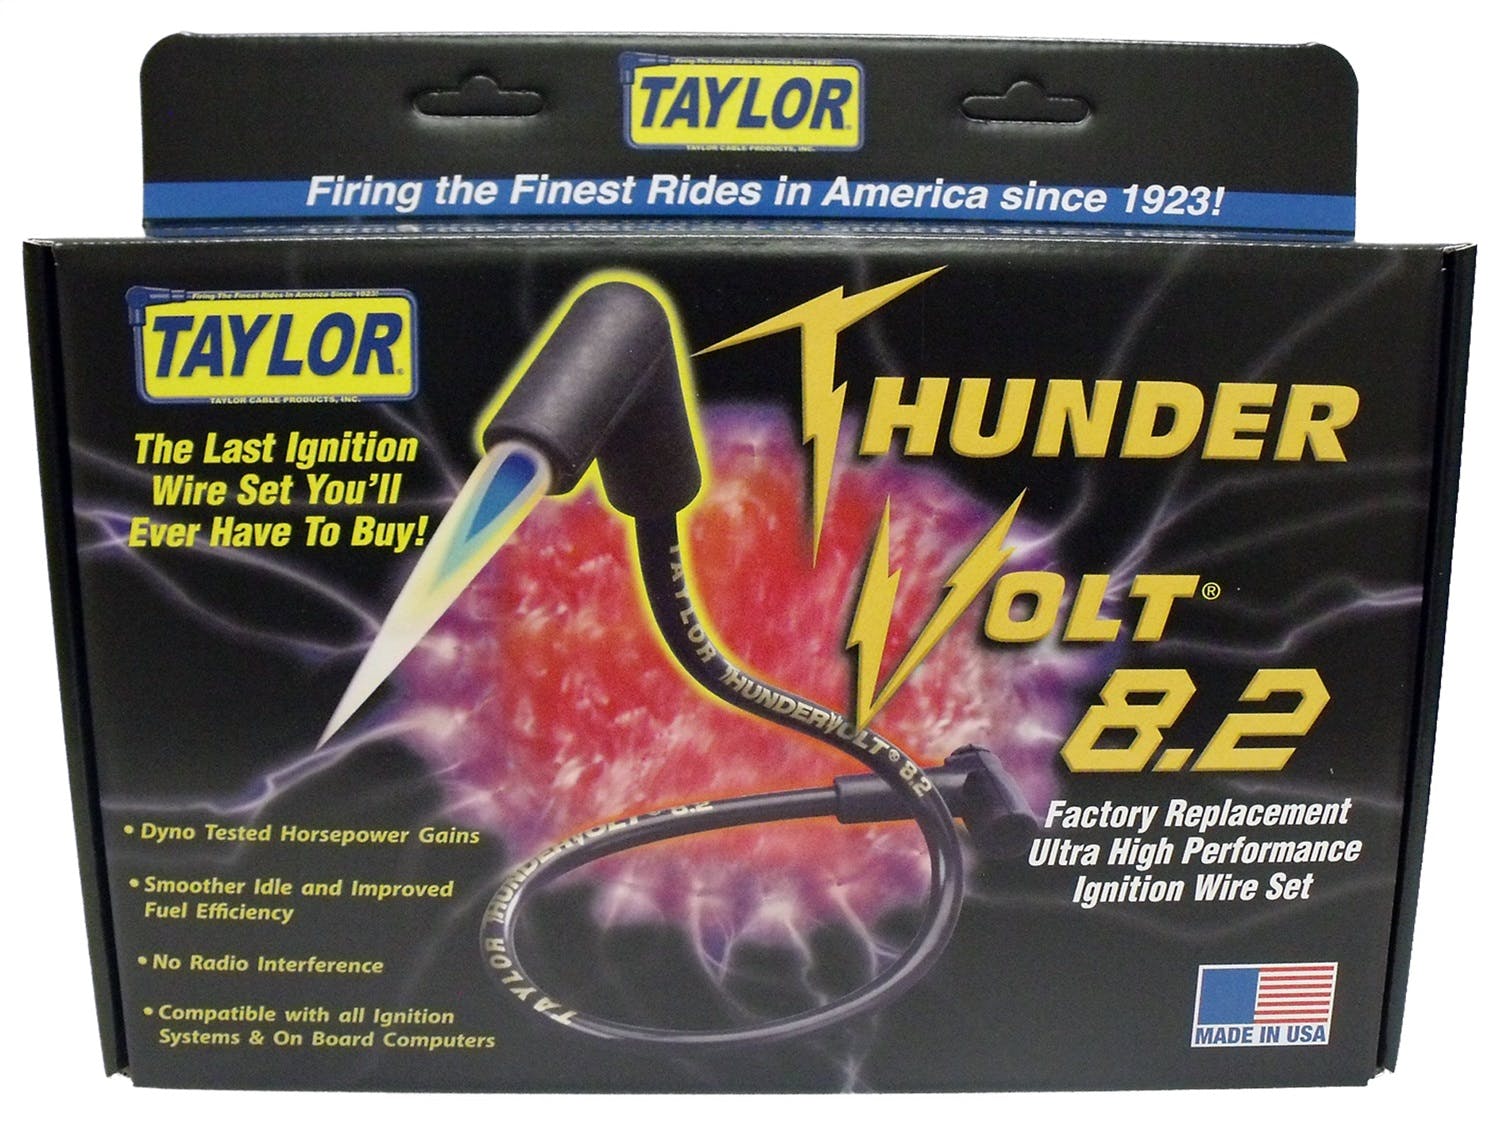 Taylor Cable Products 84277 Thundervolt 8.2 custom 10 cyl red